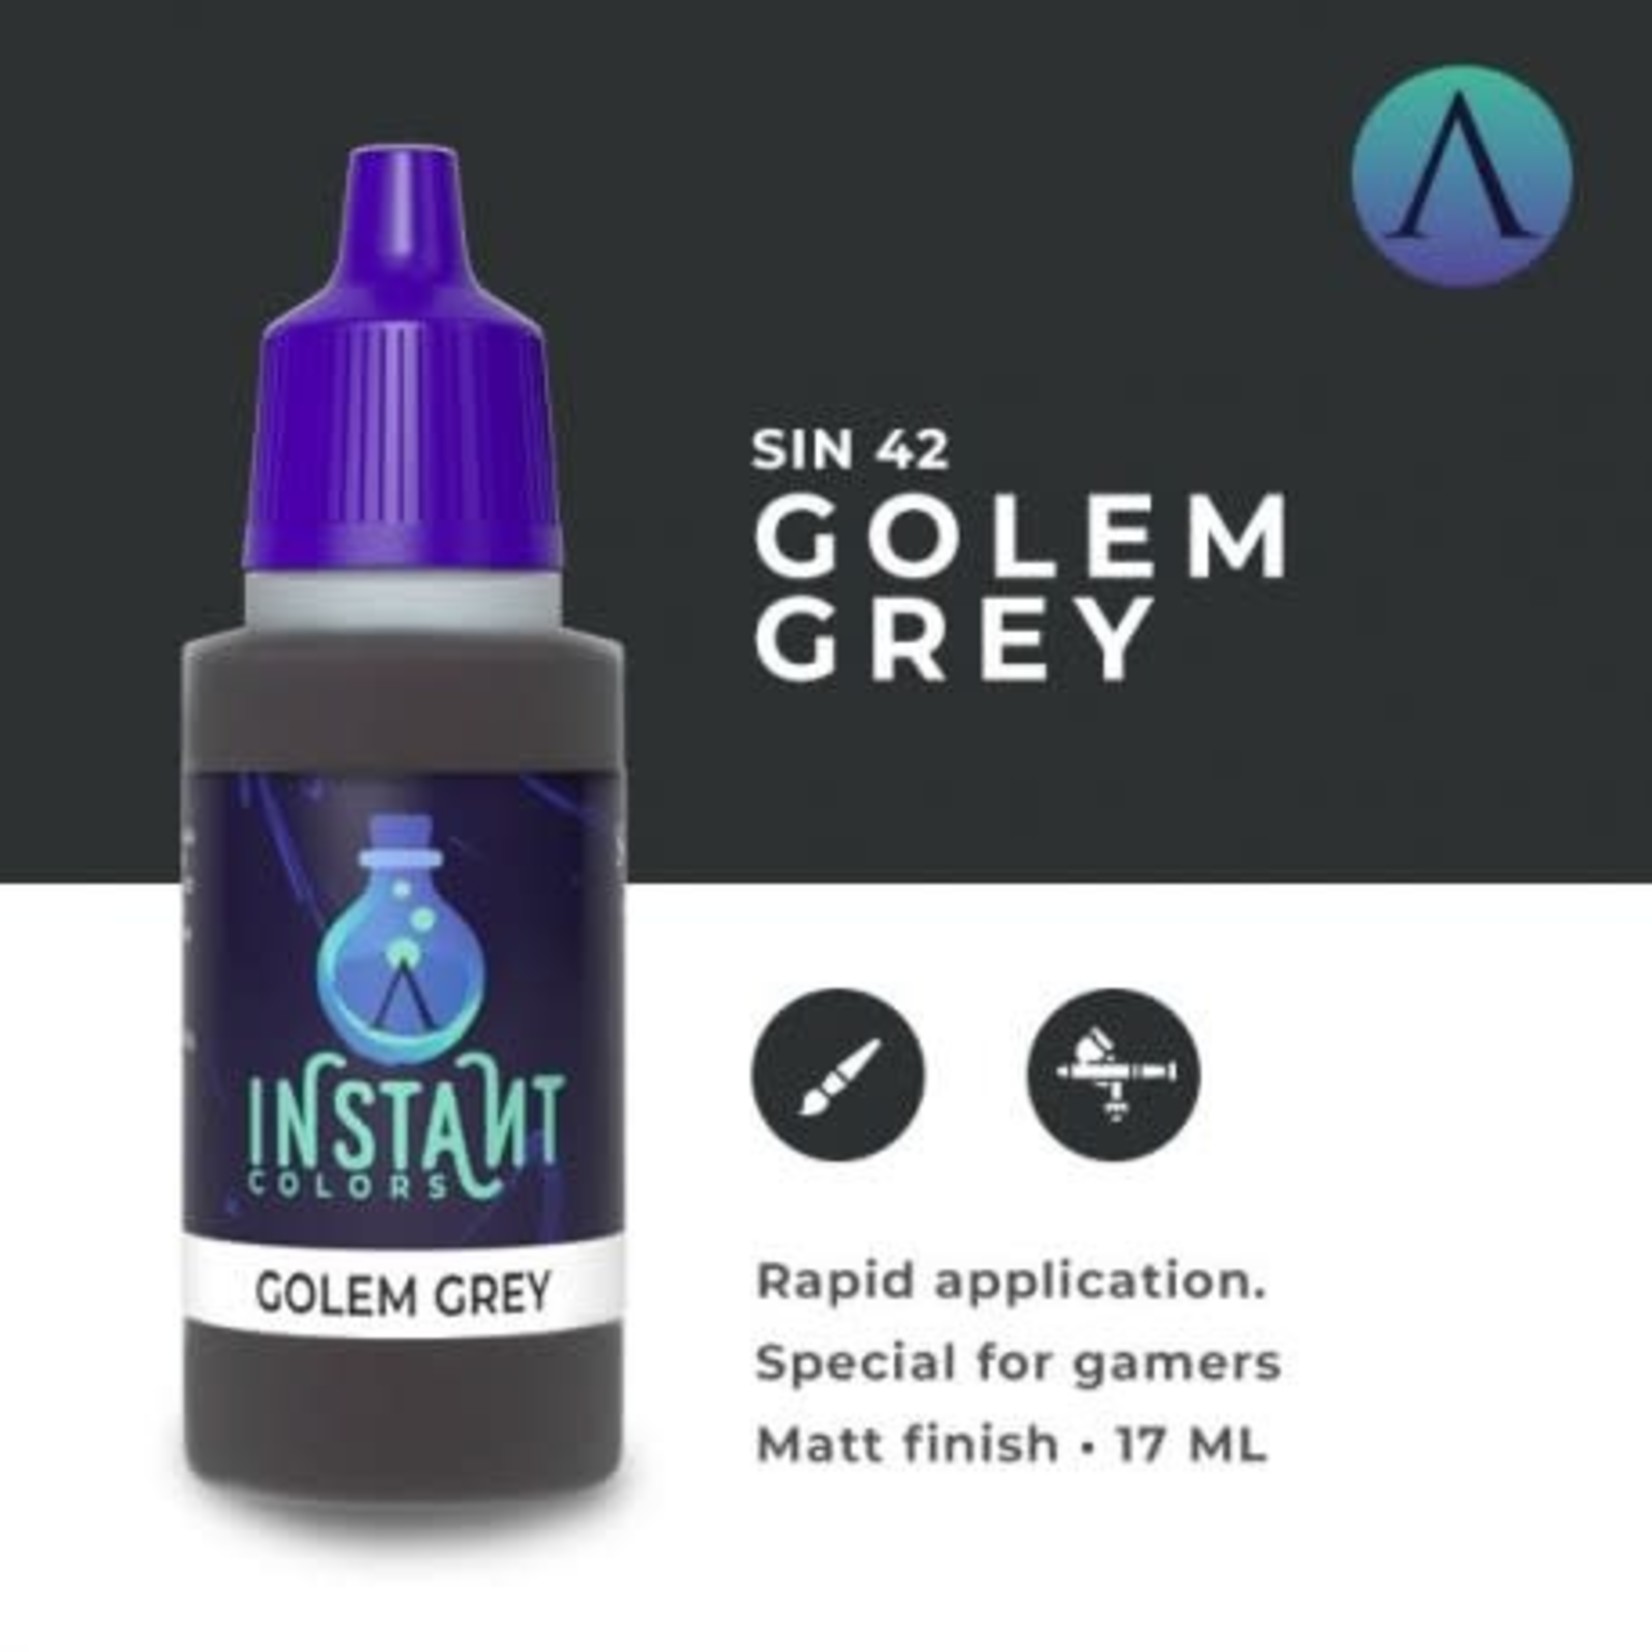 Scale 75 Instant Colors SIN42 Golem Grey 17ml